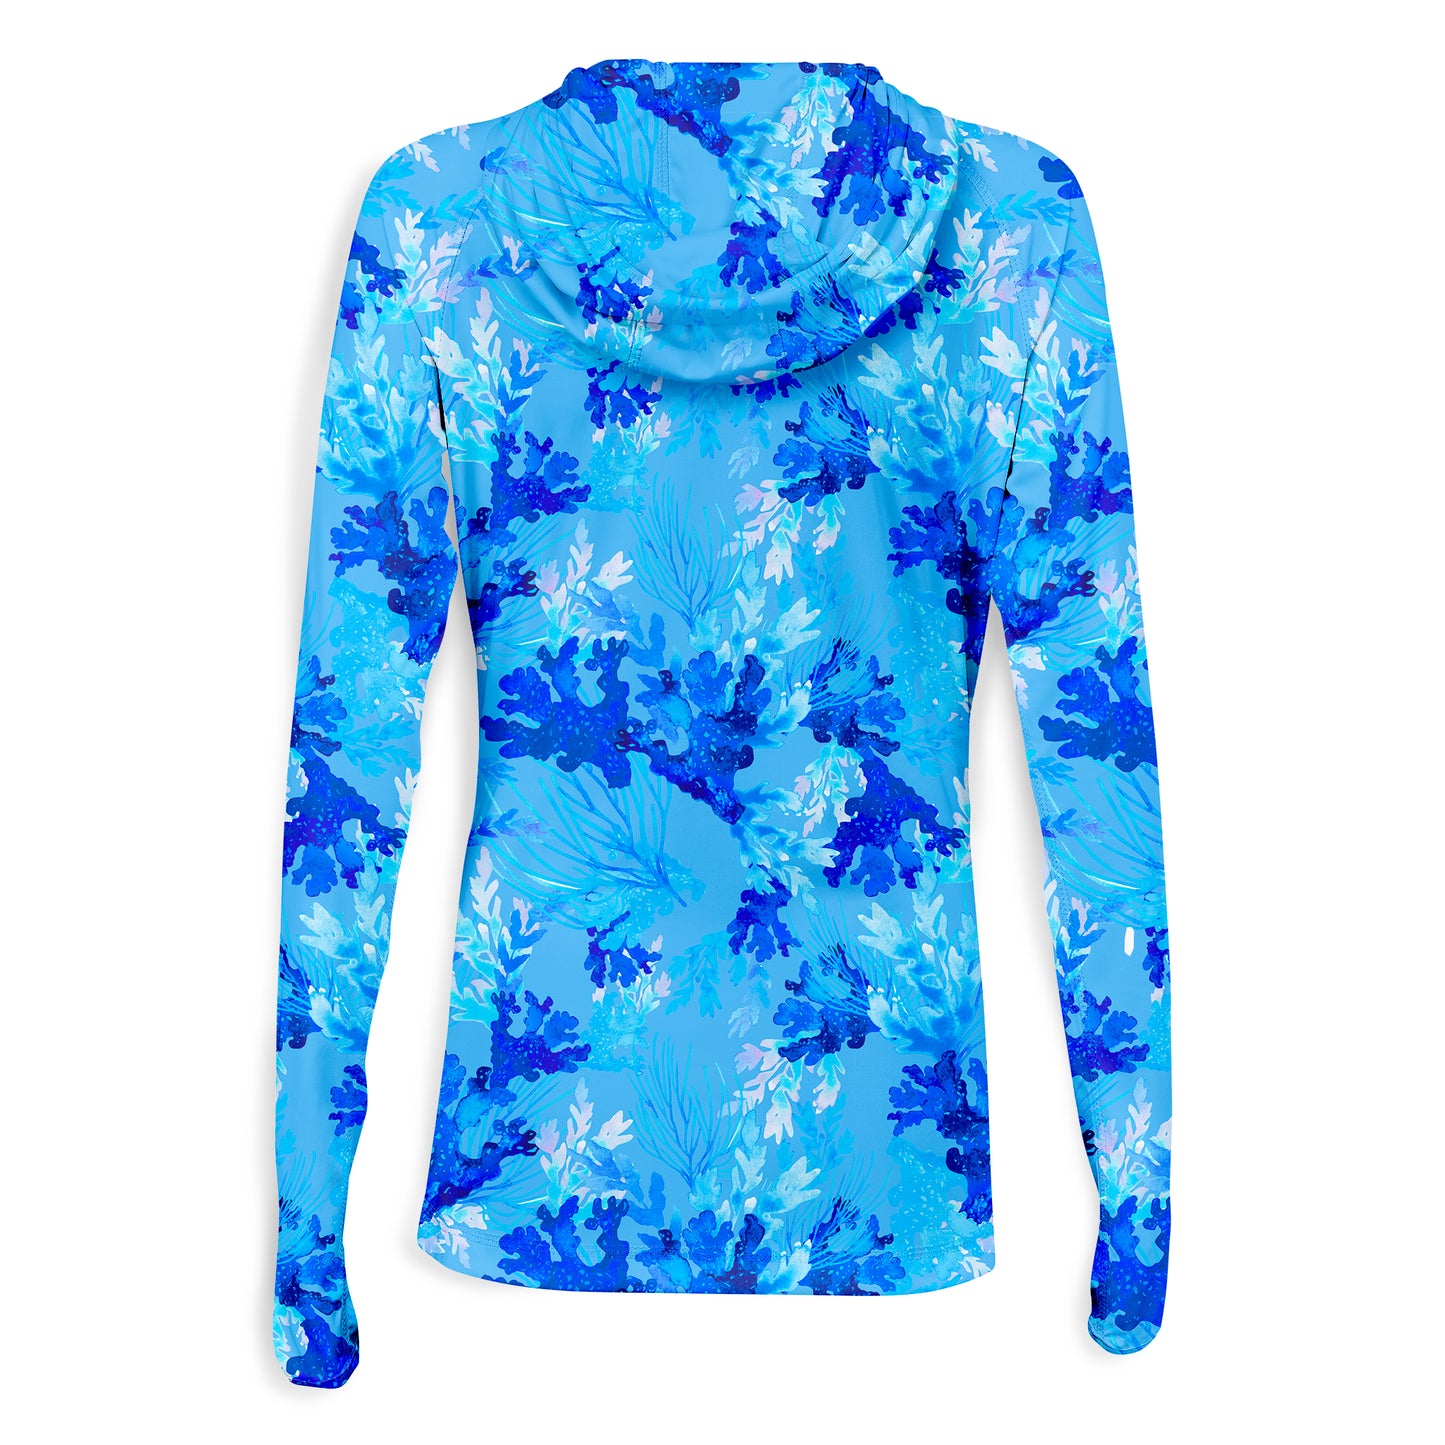 Coral Tropics Womens Hooded Performance